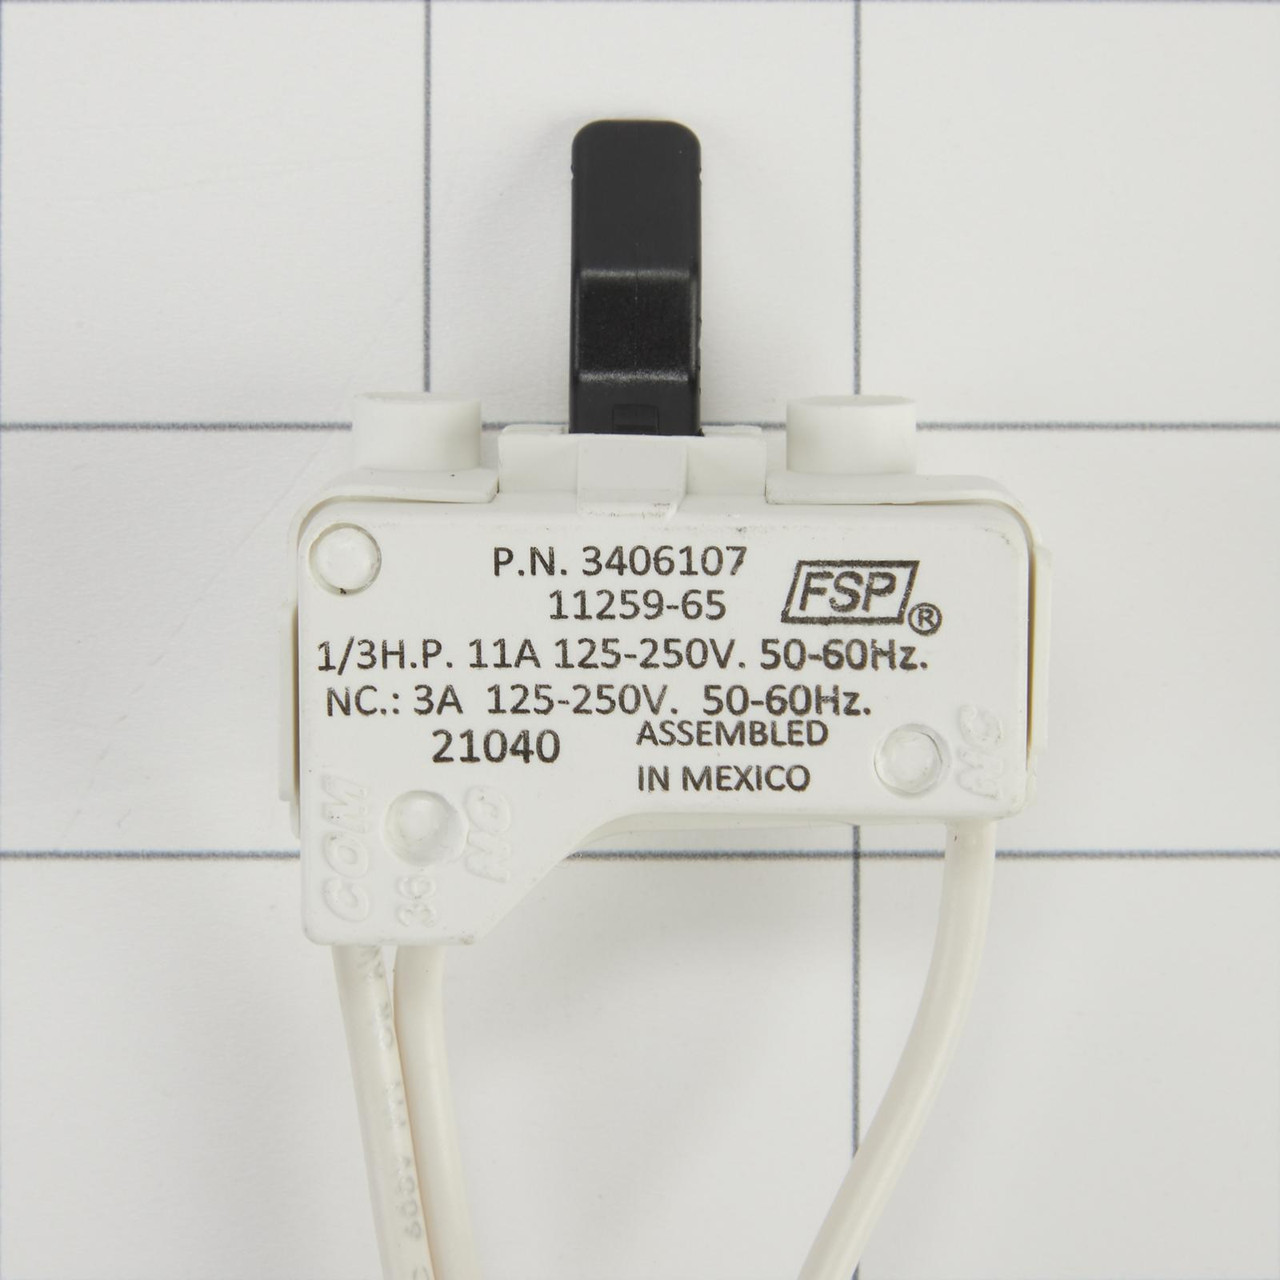 Whirlpool WP3406107 - Dryer Door Switch Assembly - Image # 4